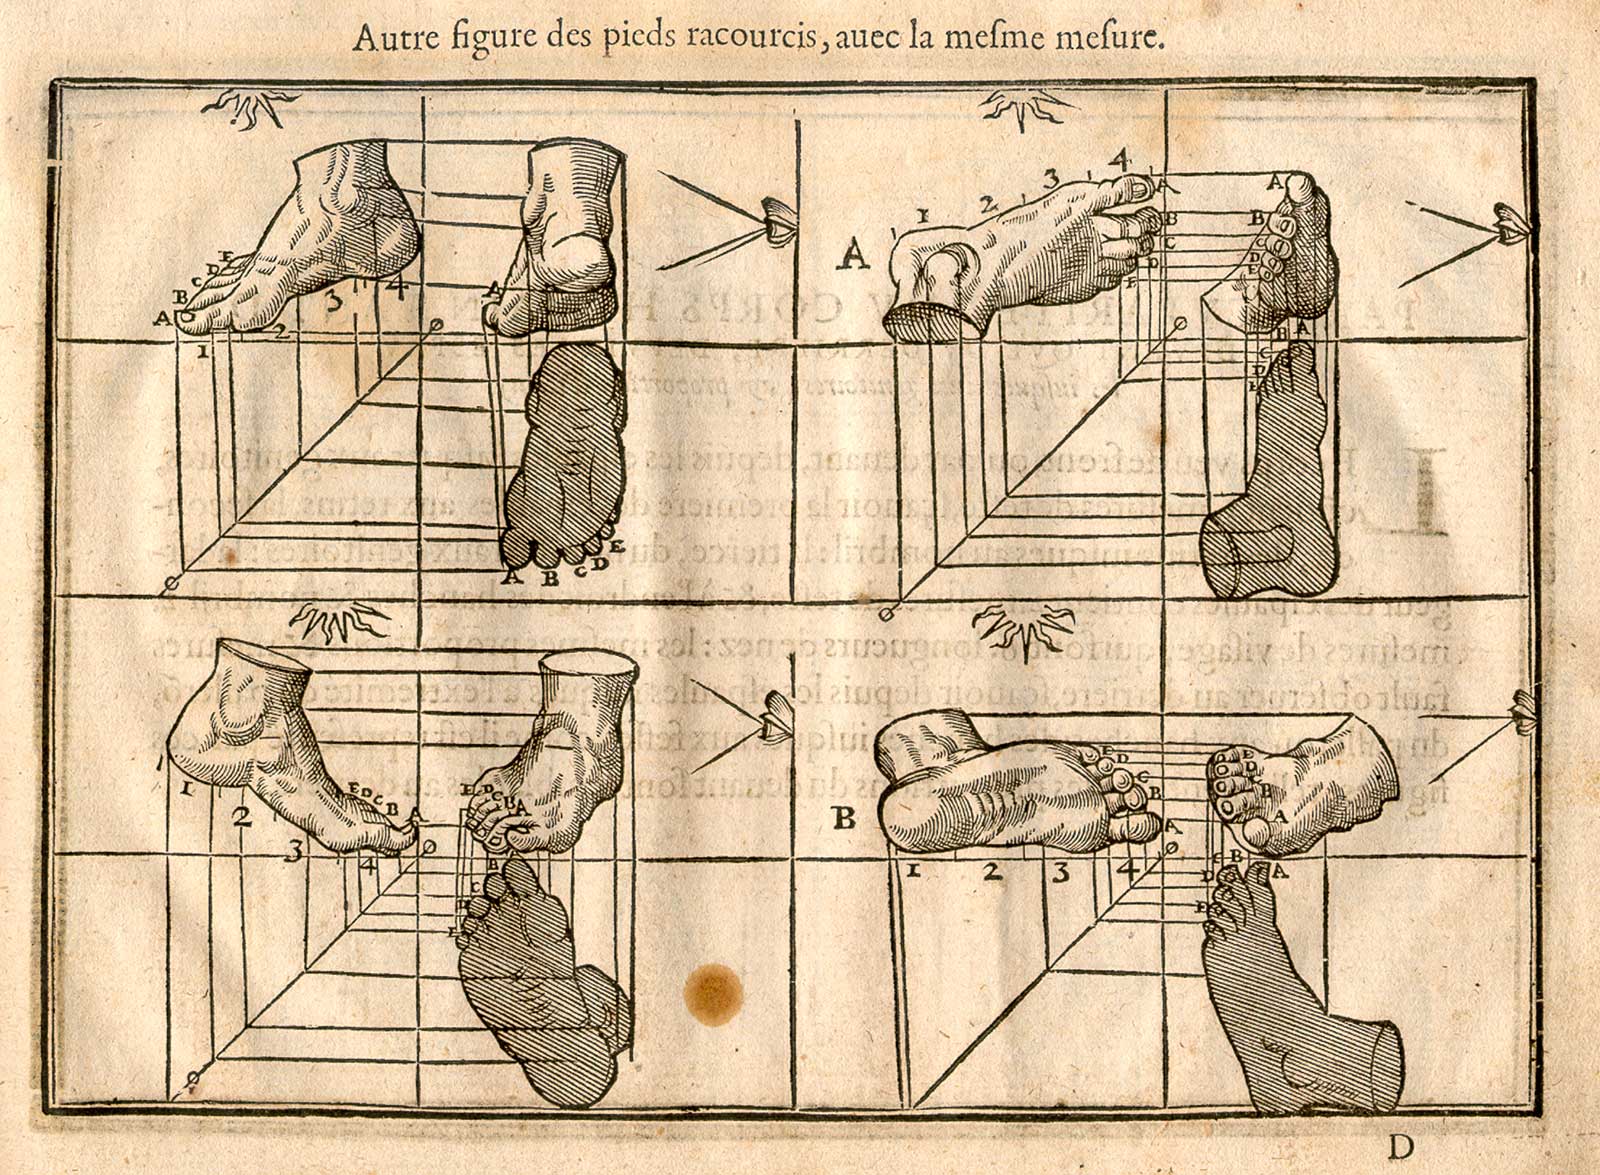 Woodcut illustration showing twelve different views of feet from many different angles, including several different side views with some proportional, from Jehan Cousin’s Livre de pourtraiture, NLM Call no.: WZ 250 C8673L 1608.